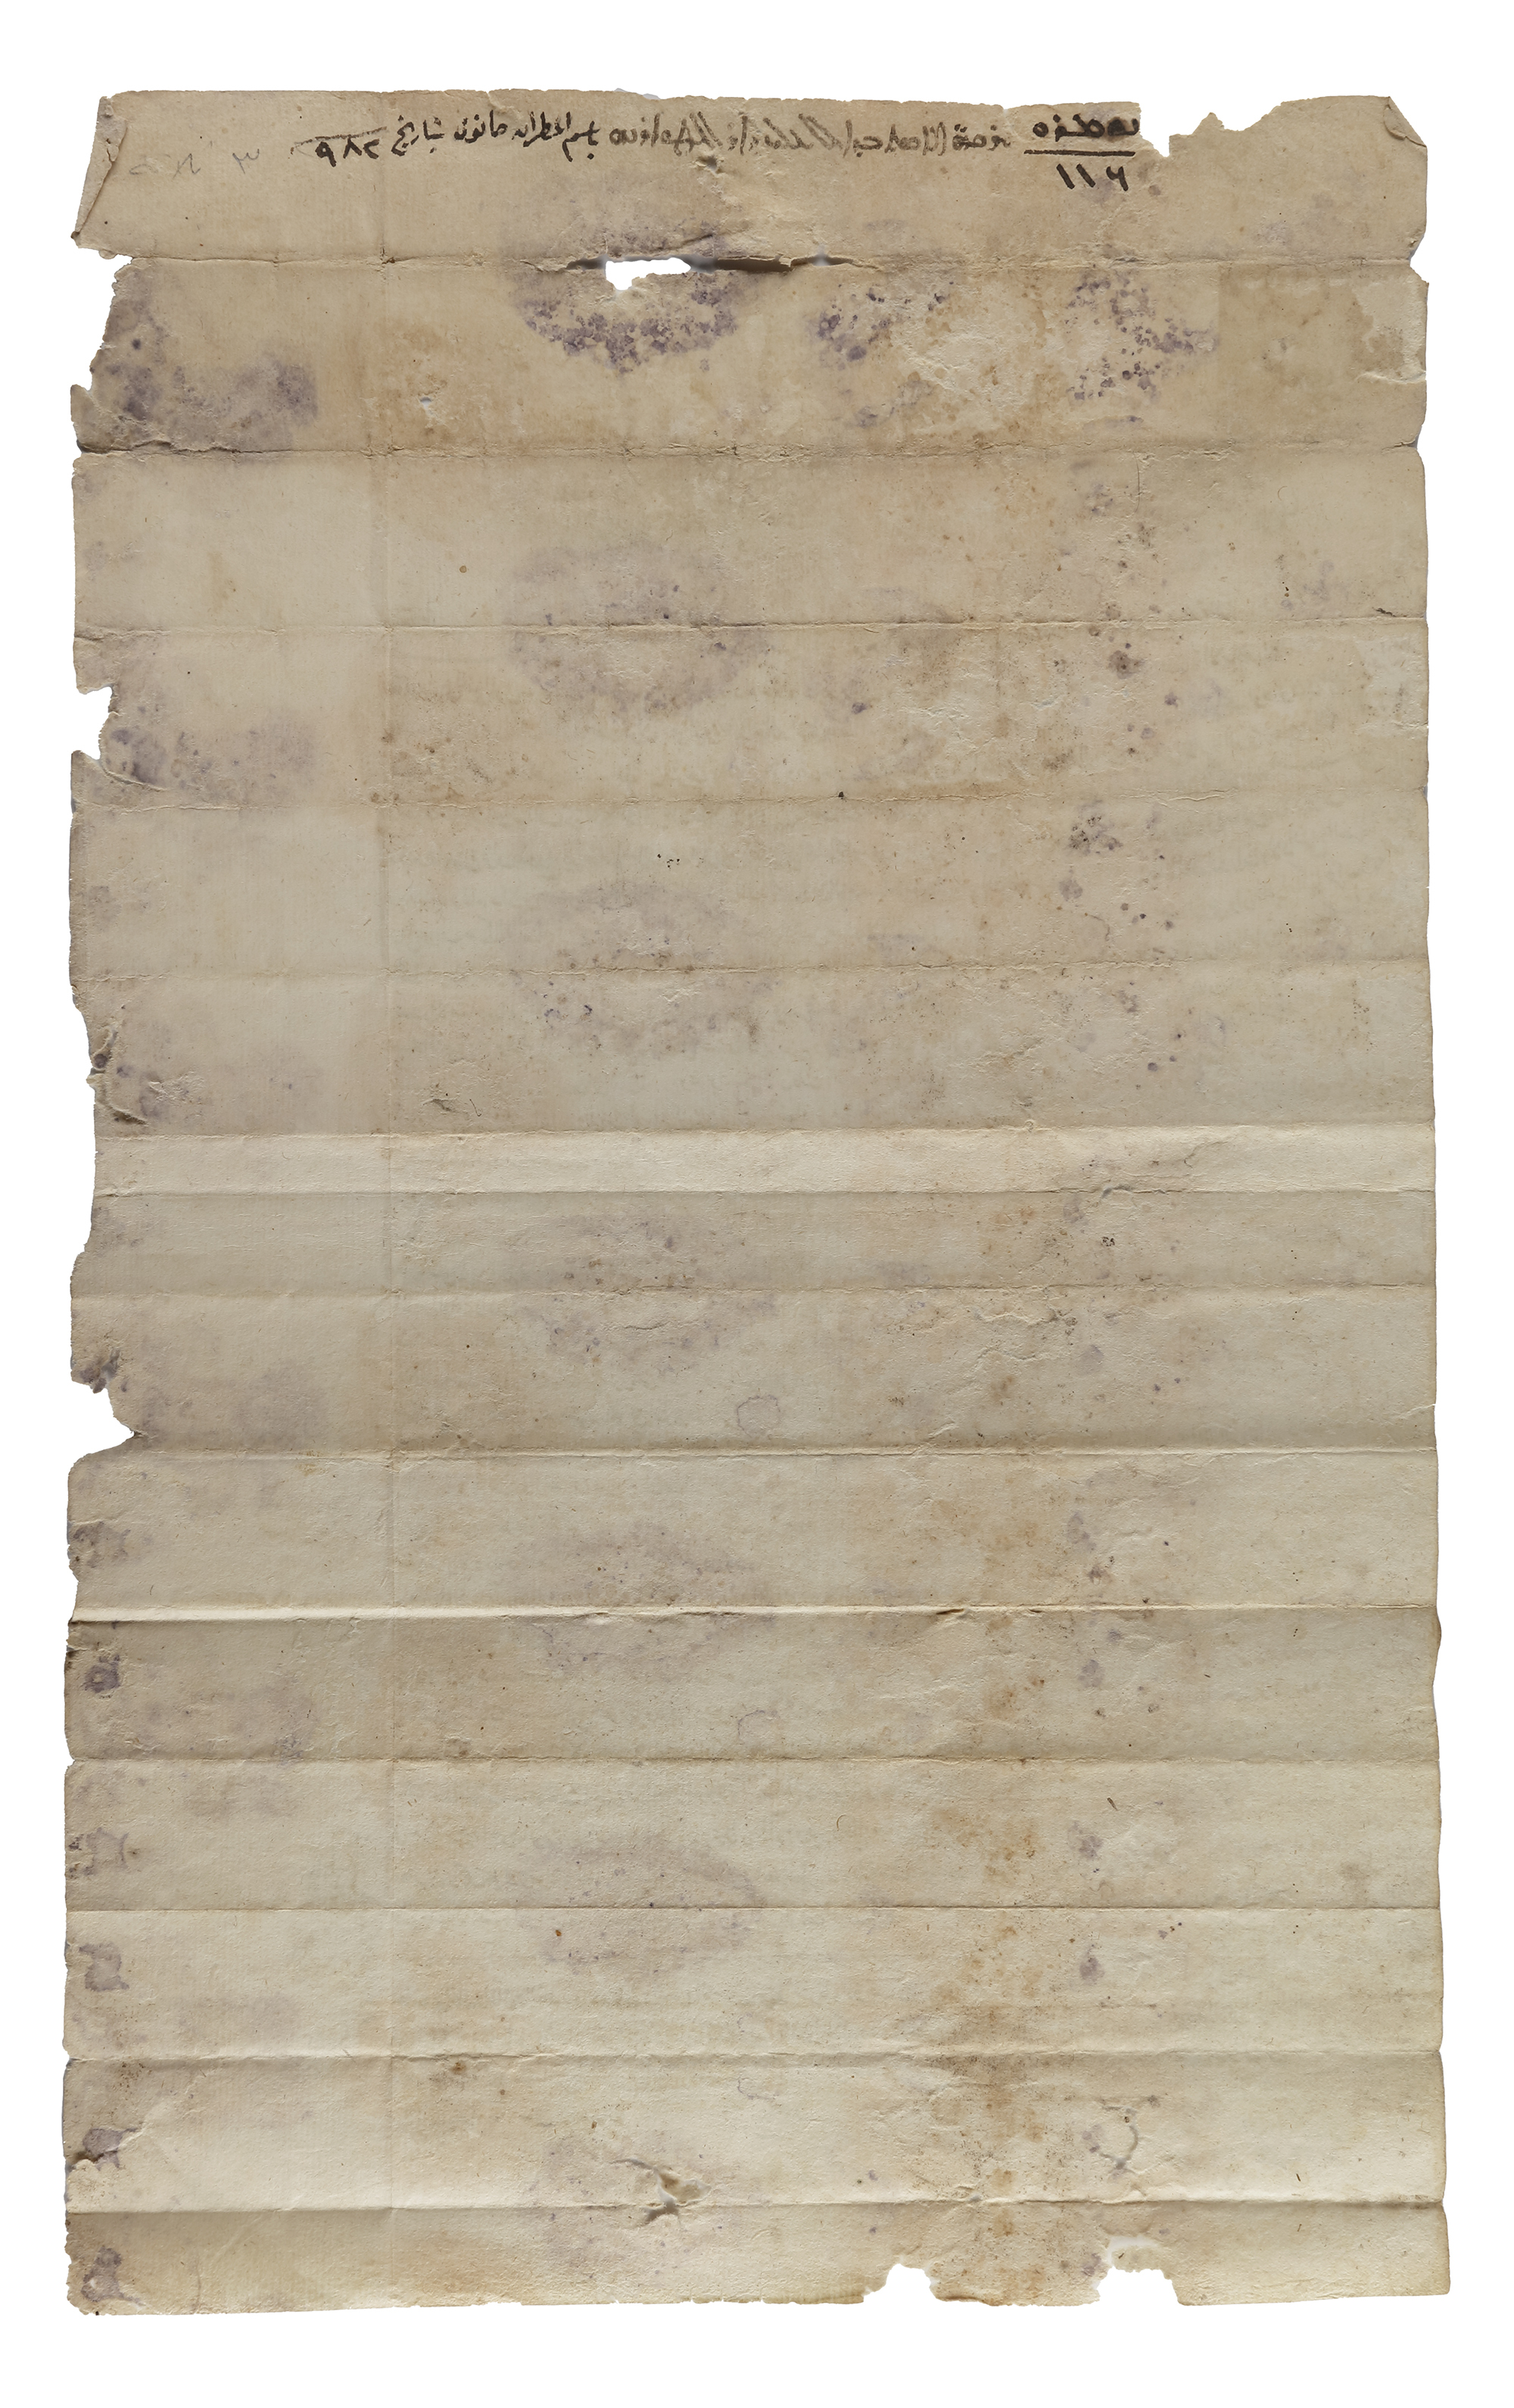 WAQFIYYAH SCROLL, A LARGE AND DETAILED LEGAL DOCUMENT, OTTOMAN JERUSALEM DATED 982 AH/1574 AD - Image 3 of 4